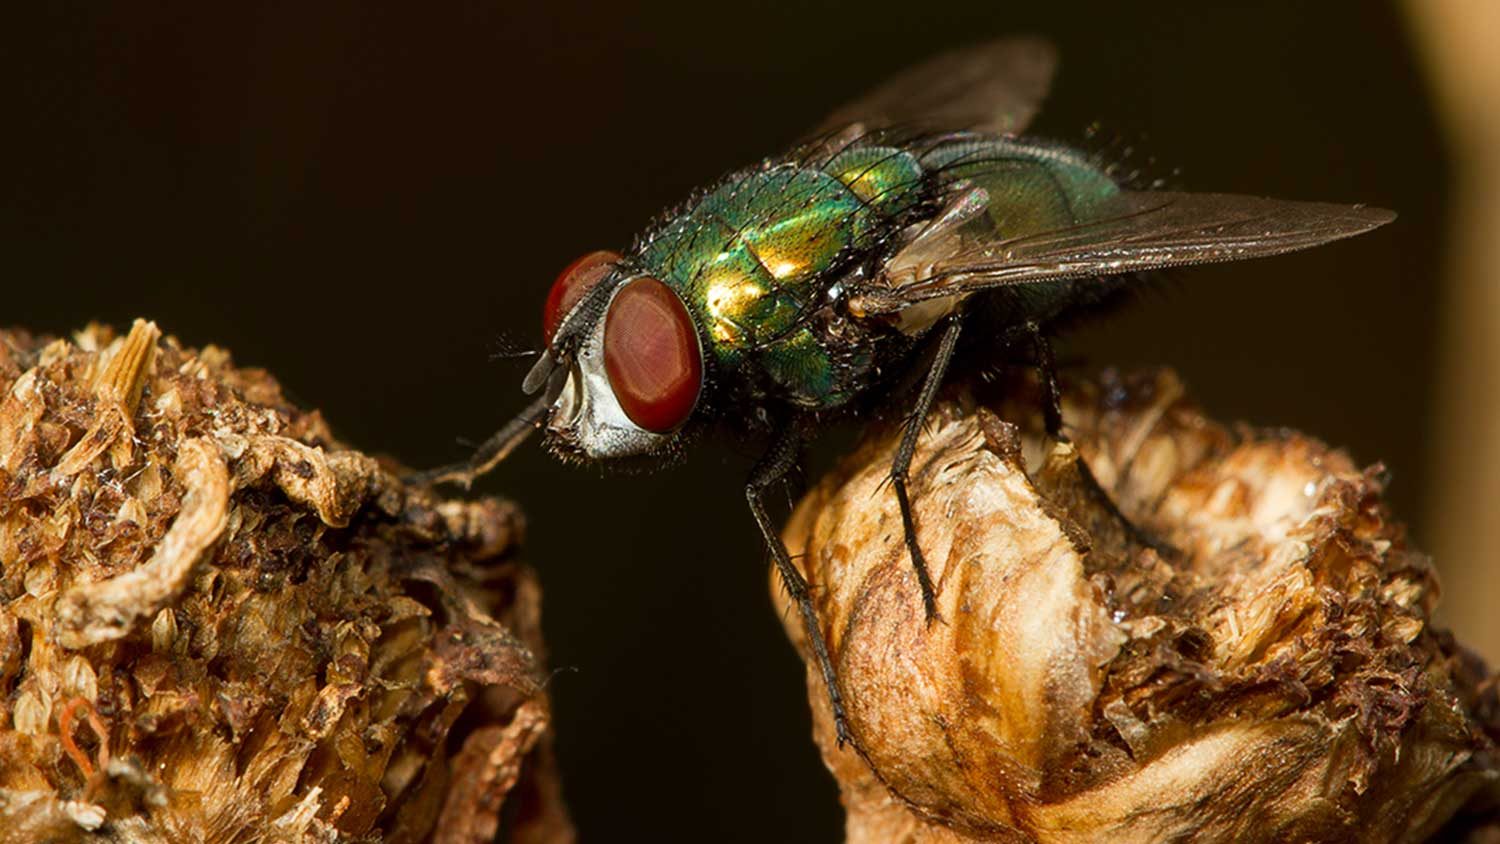 Insect, the Australian sheep blowfly